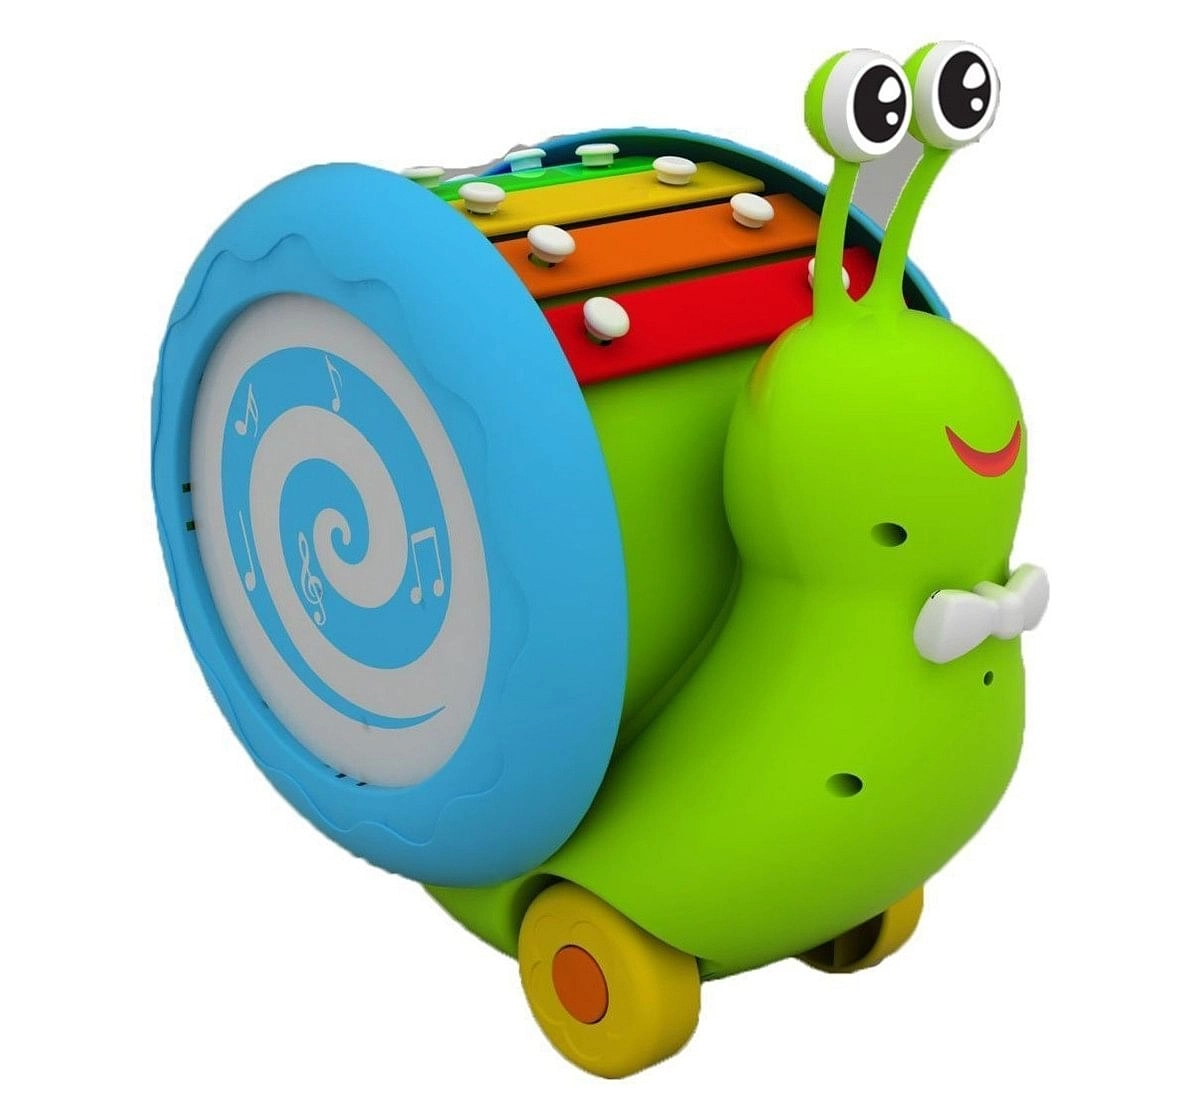  Giggles Musical Snail, Multi Color Activity Toys for Kids age 12M+ 